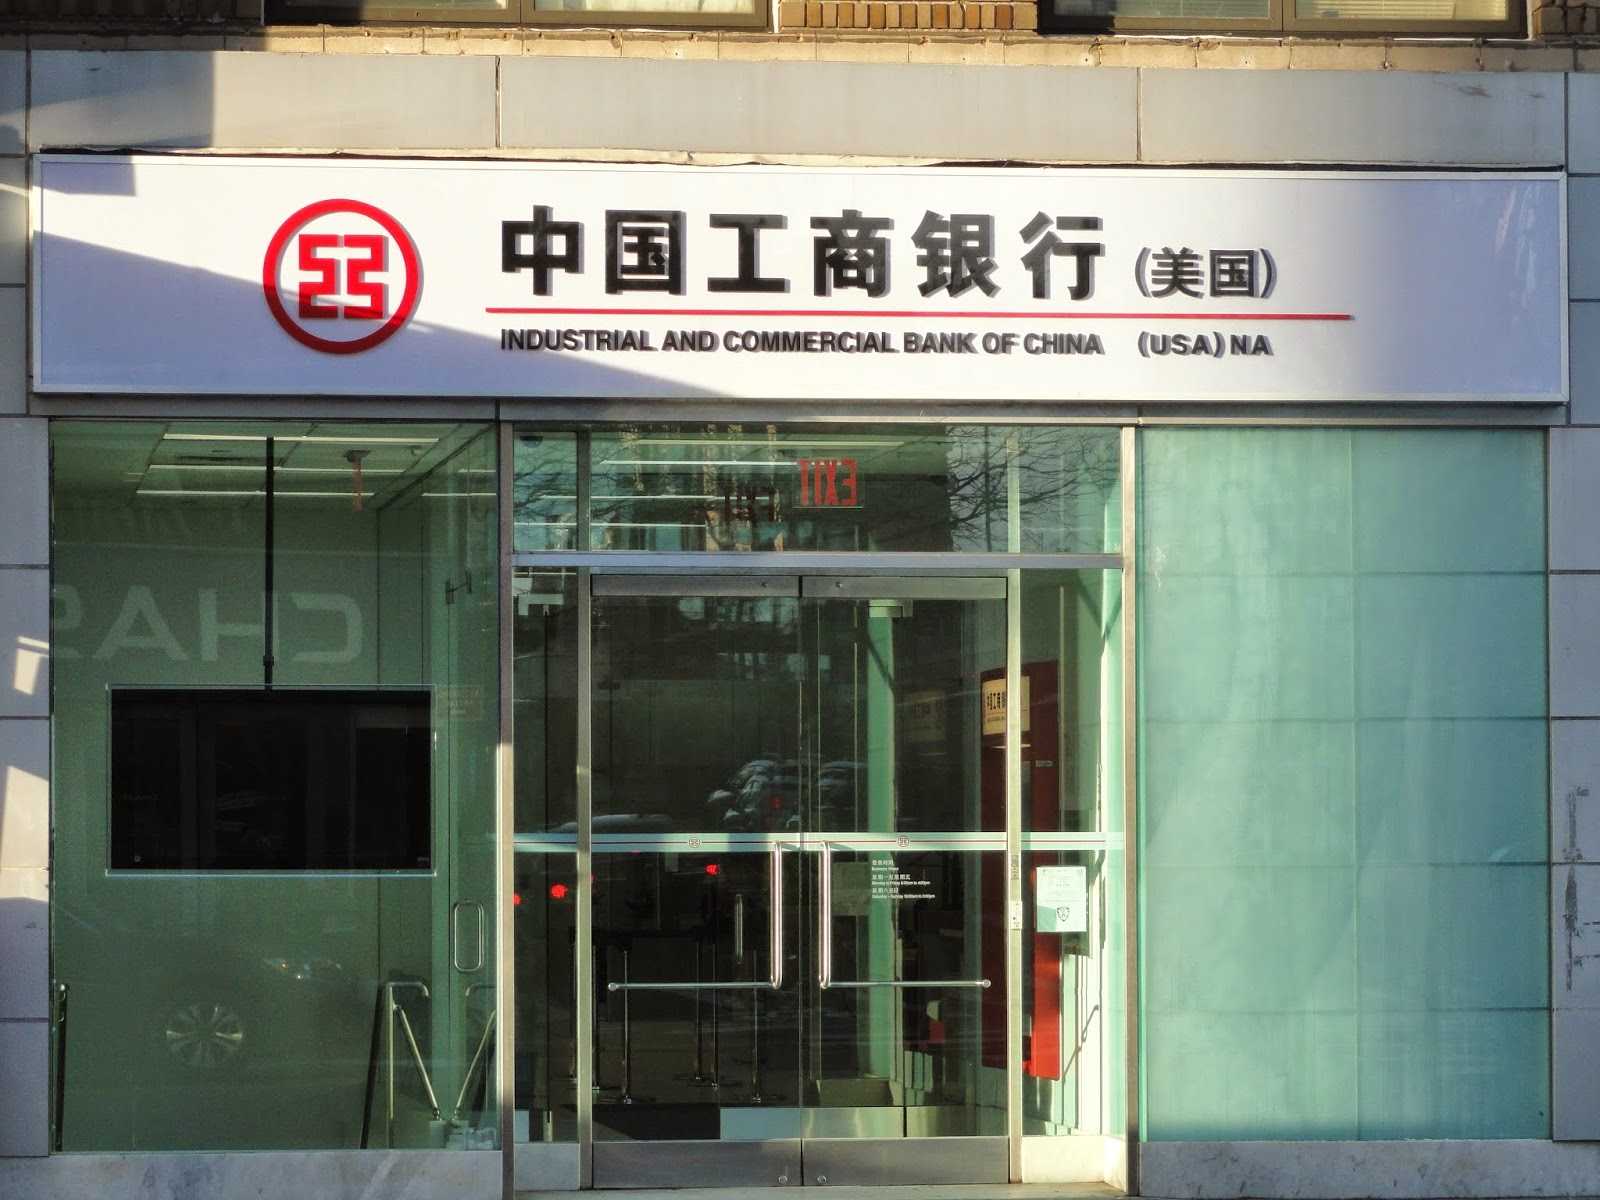 Heihe rural commercial bank